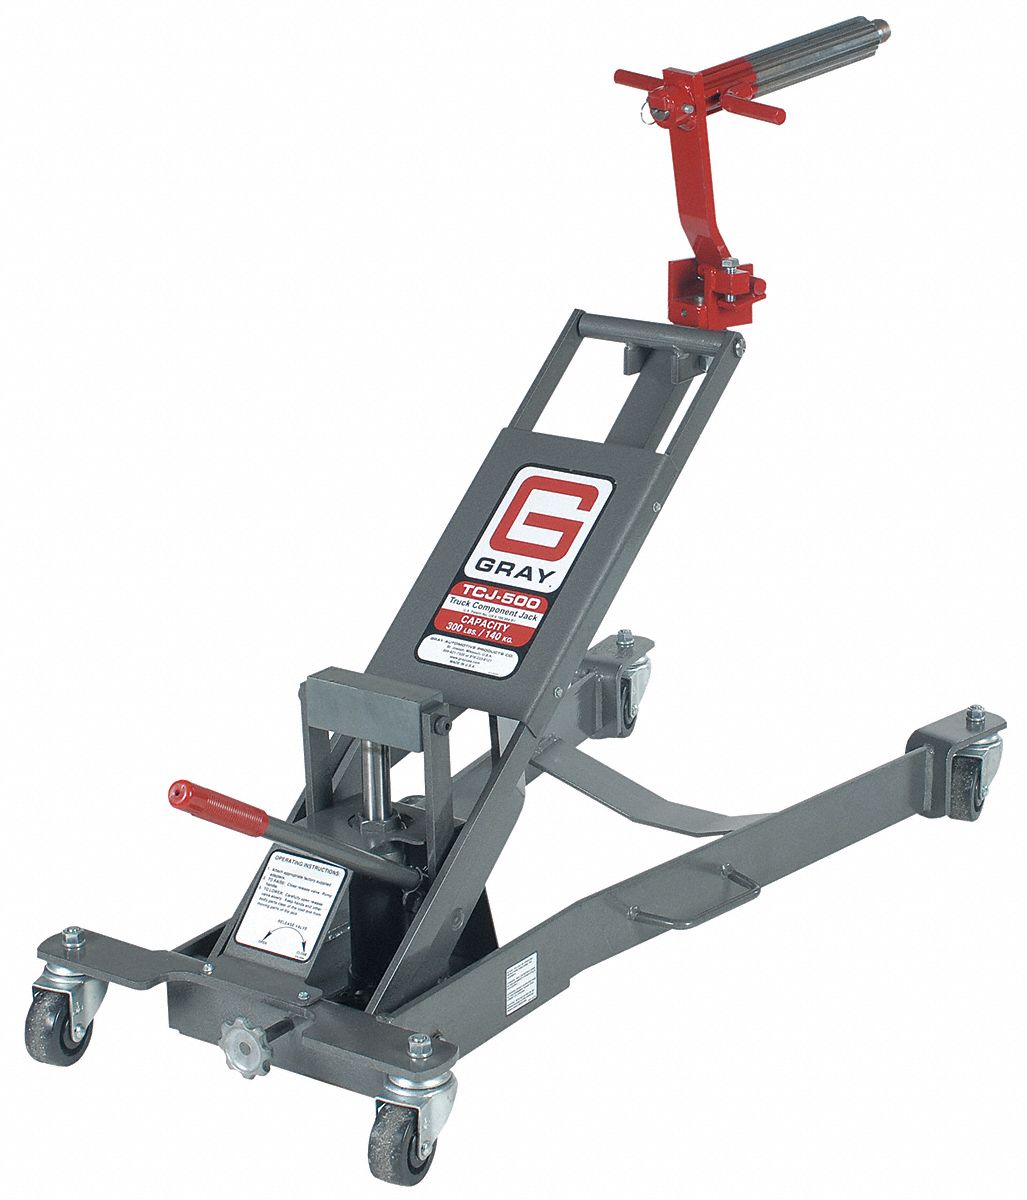 Clutch/Component Jack,  Hydraulic,  300 lb Lifting Capacity (Lb.),  39 in Lifting Height Max. (In.)